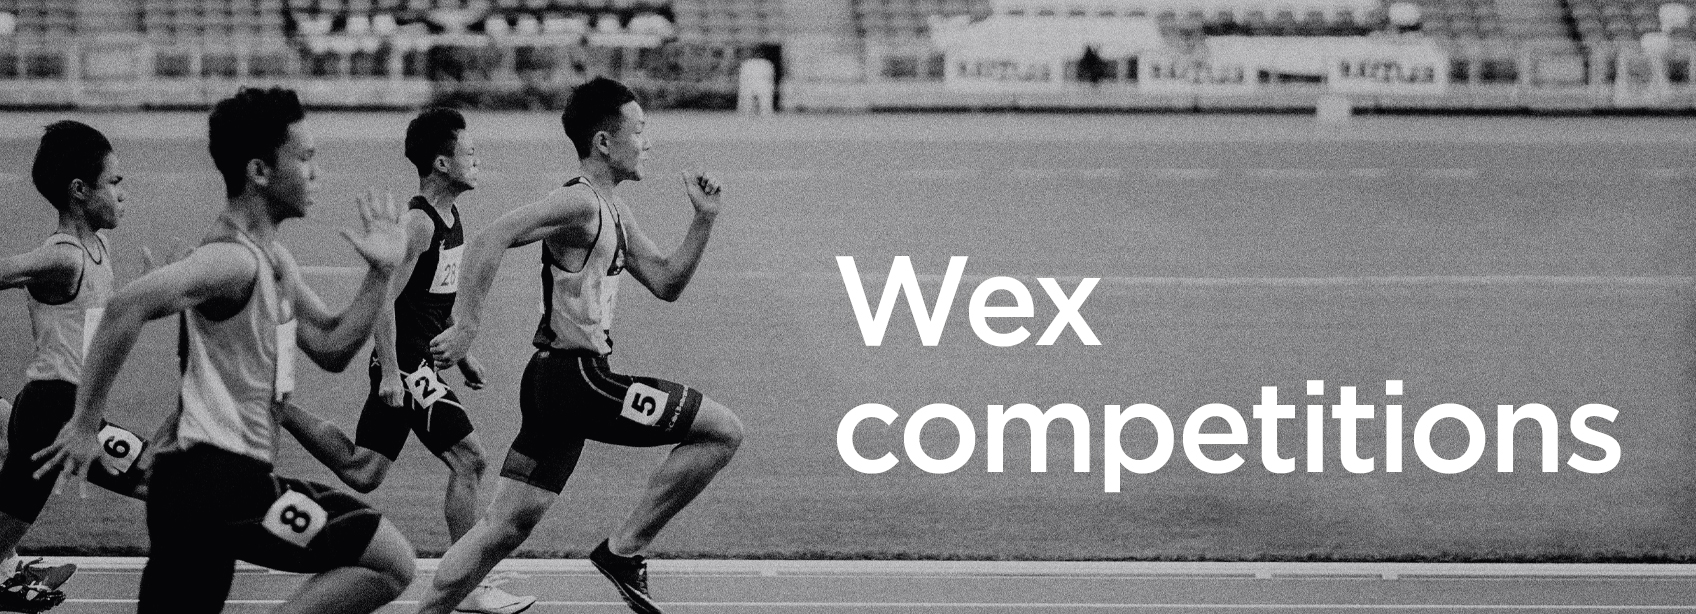 Wex competitions